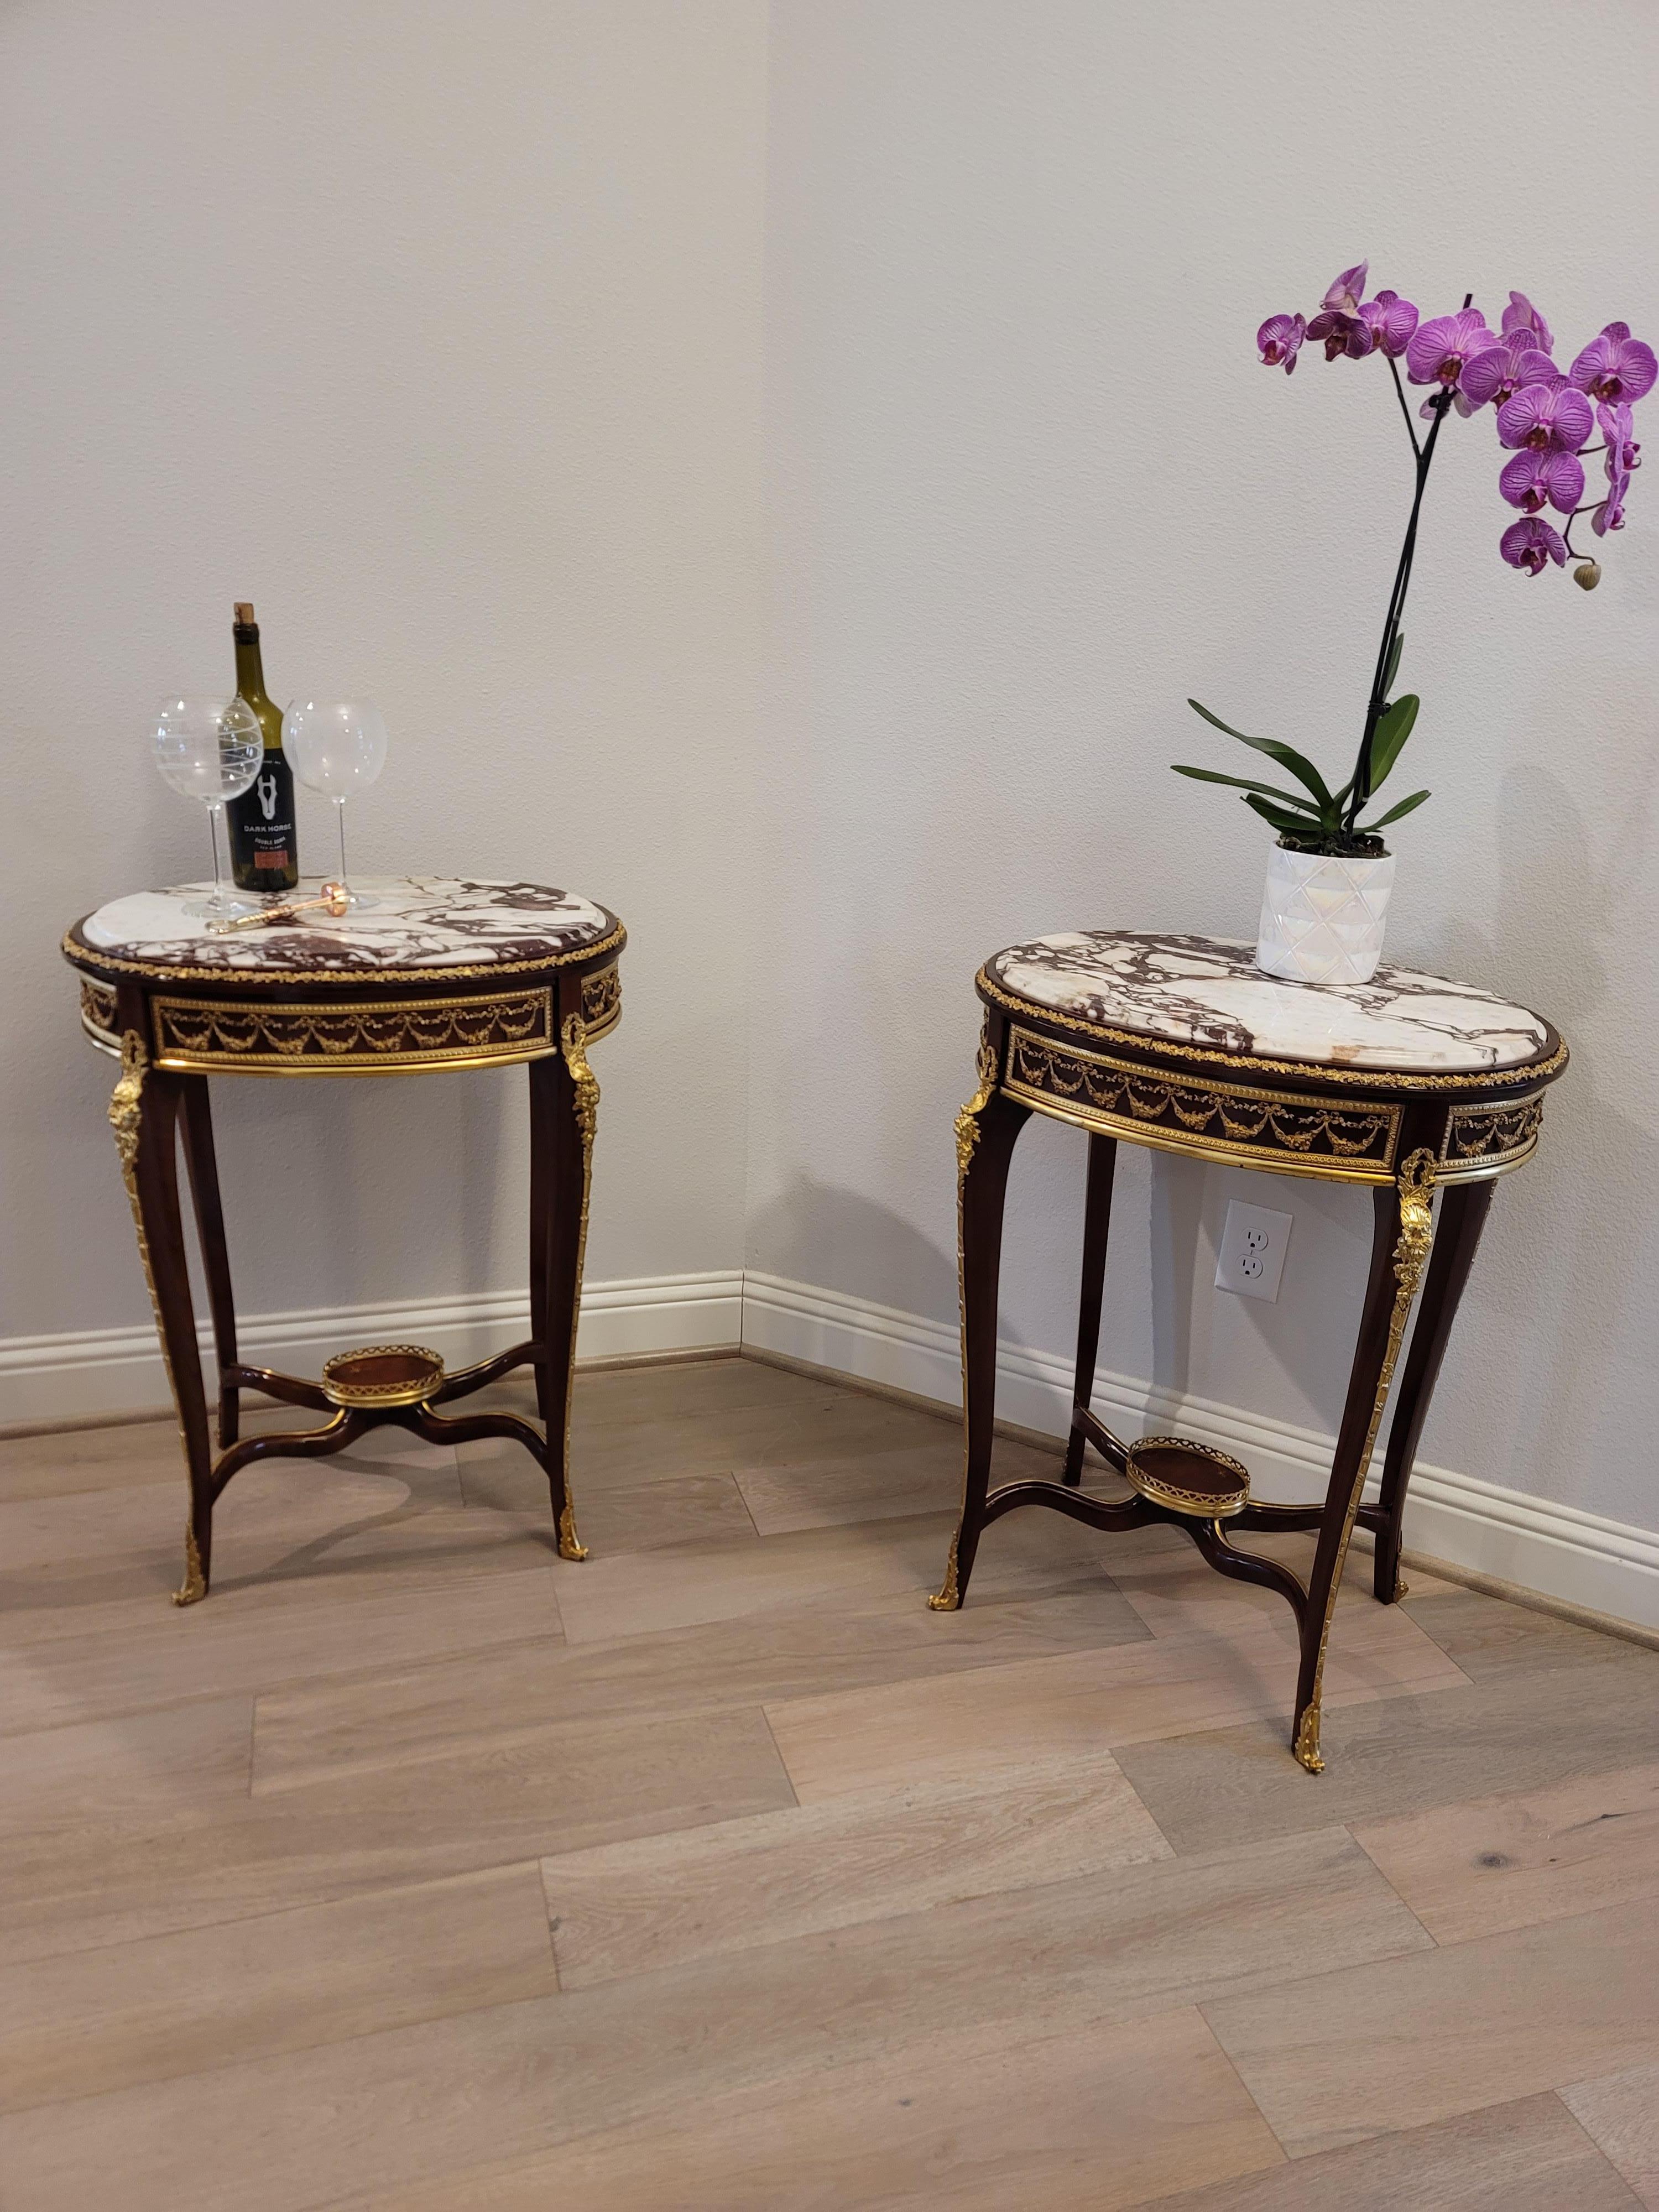 A very fine pair of antique French Louis XV style gilt bronze ormolu mounted mahogany tiered side tables with breccia violetta marble tops. circa 1900

Exquisitely hand-crafted in France at the turn of the late 19th / early 20th century, most